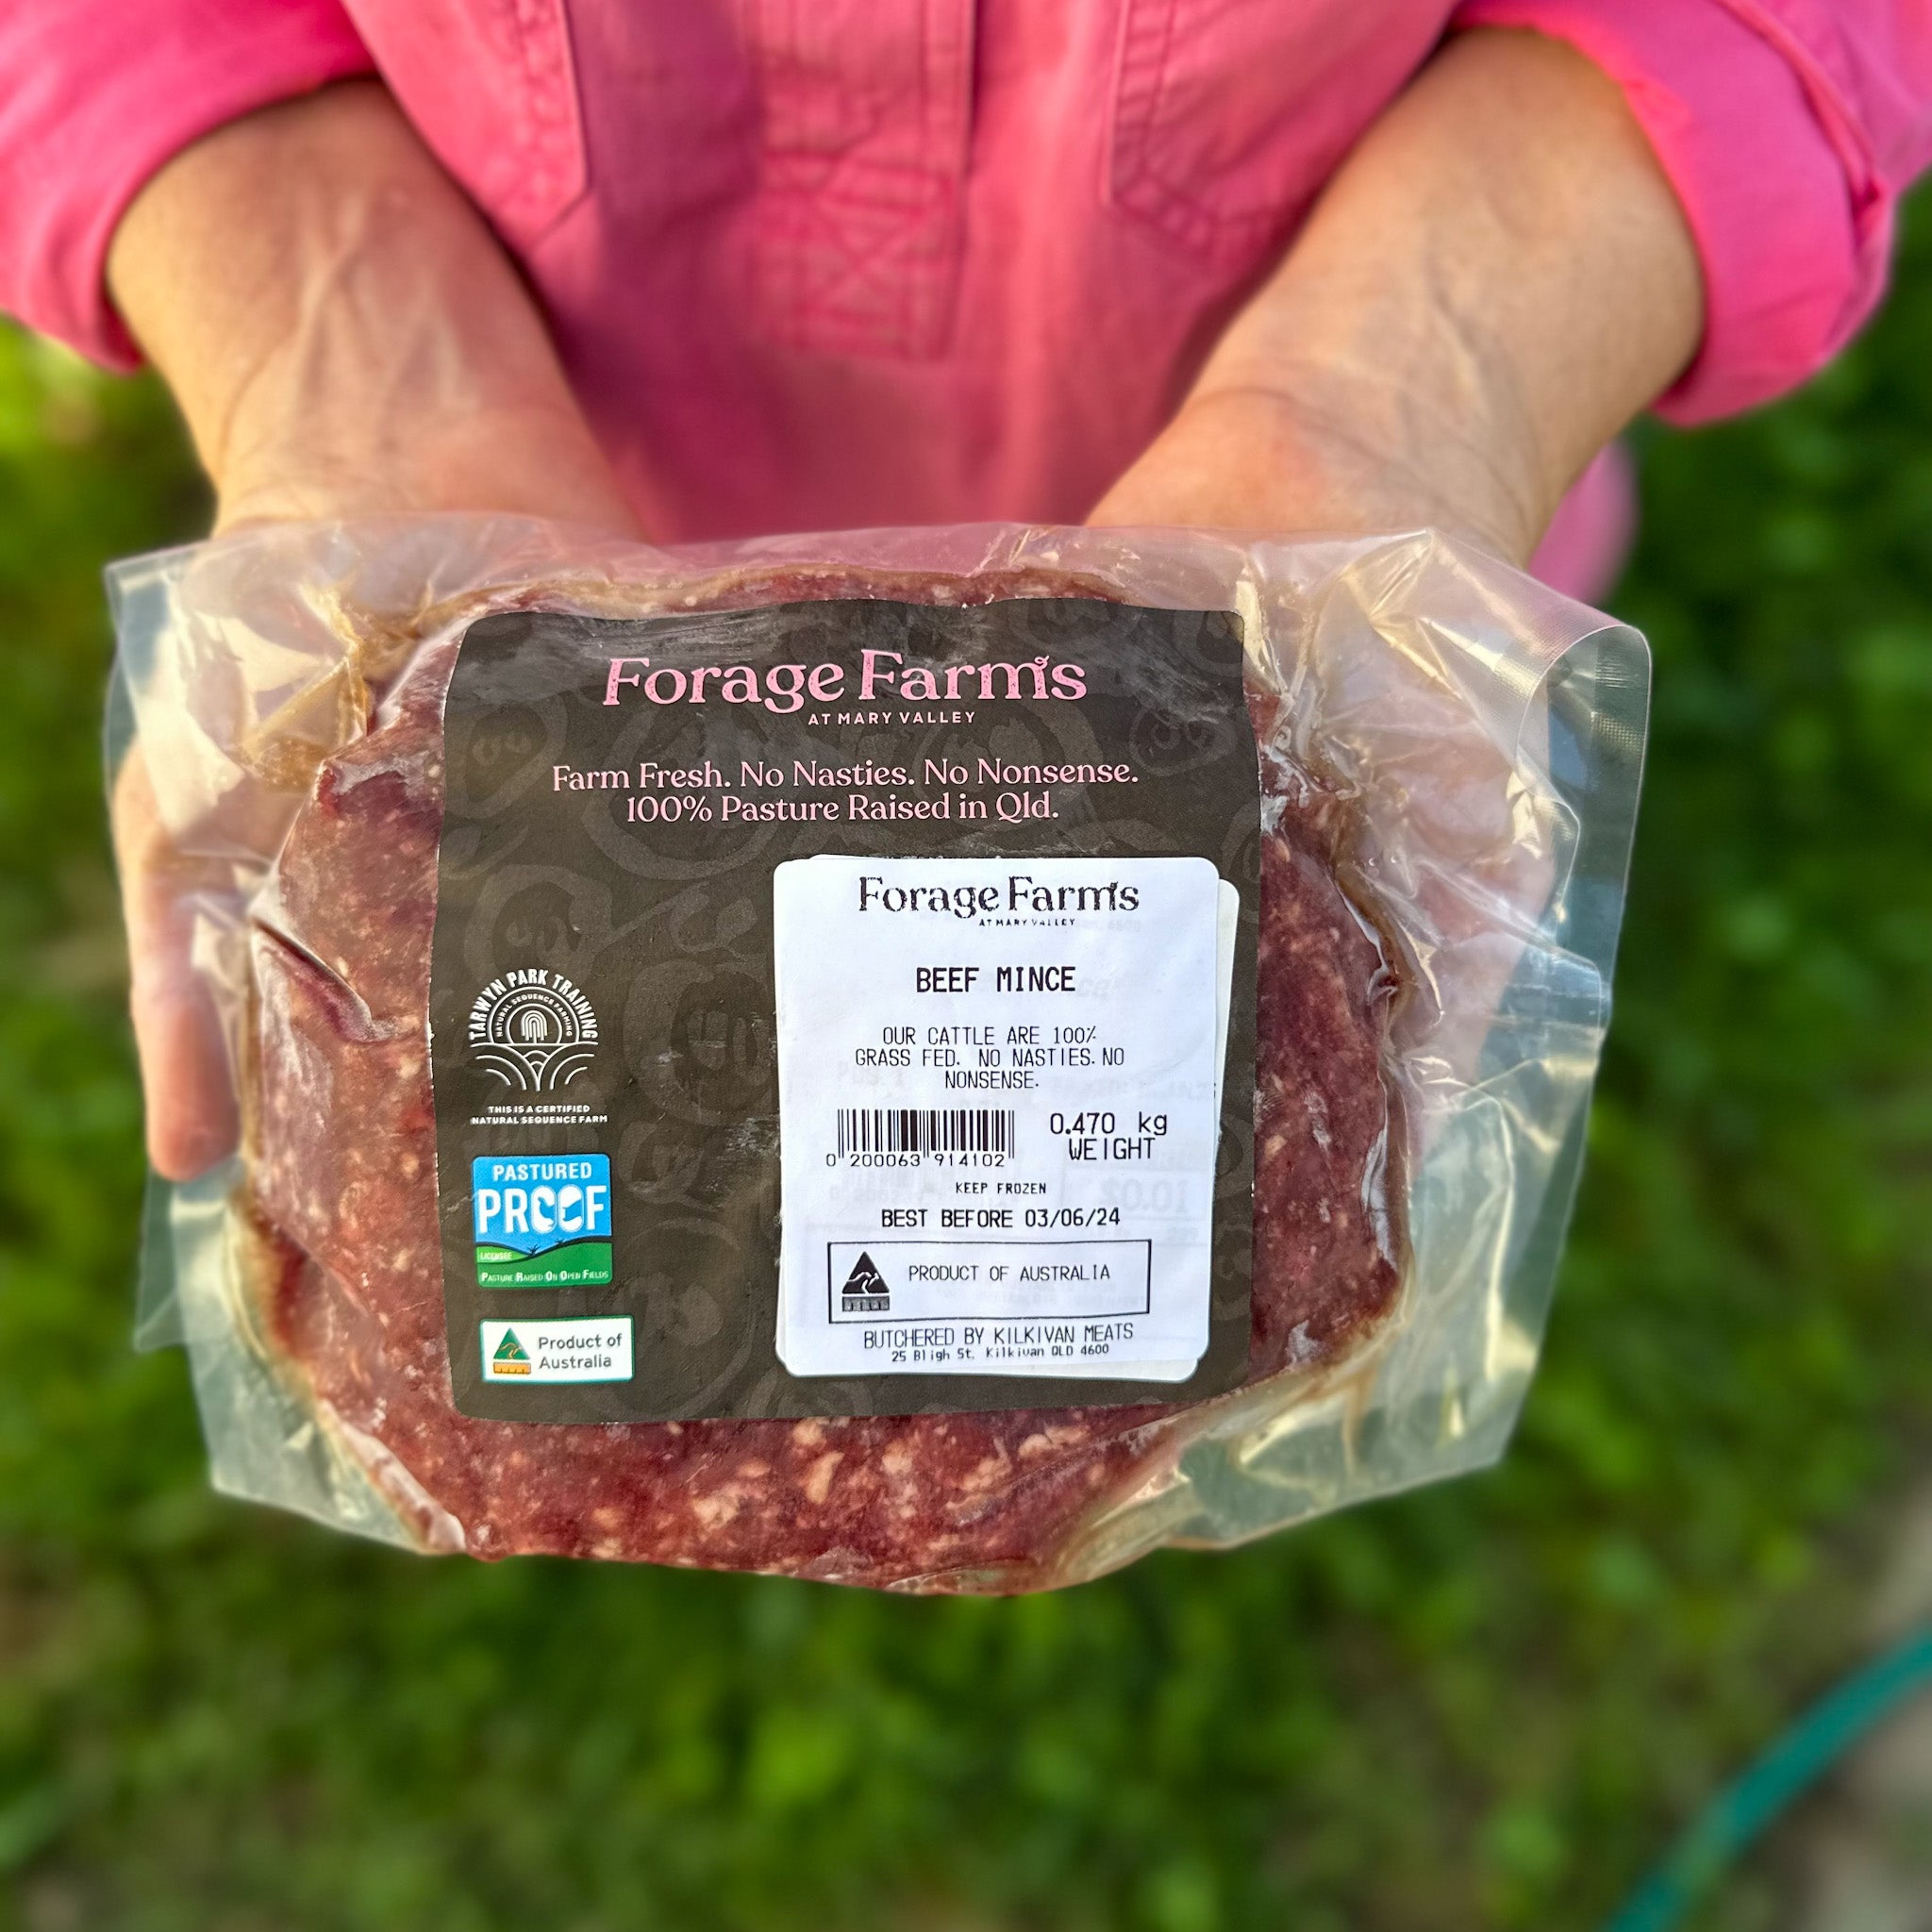 Forage Farms Grass Fed & Finished Beef Mince